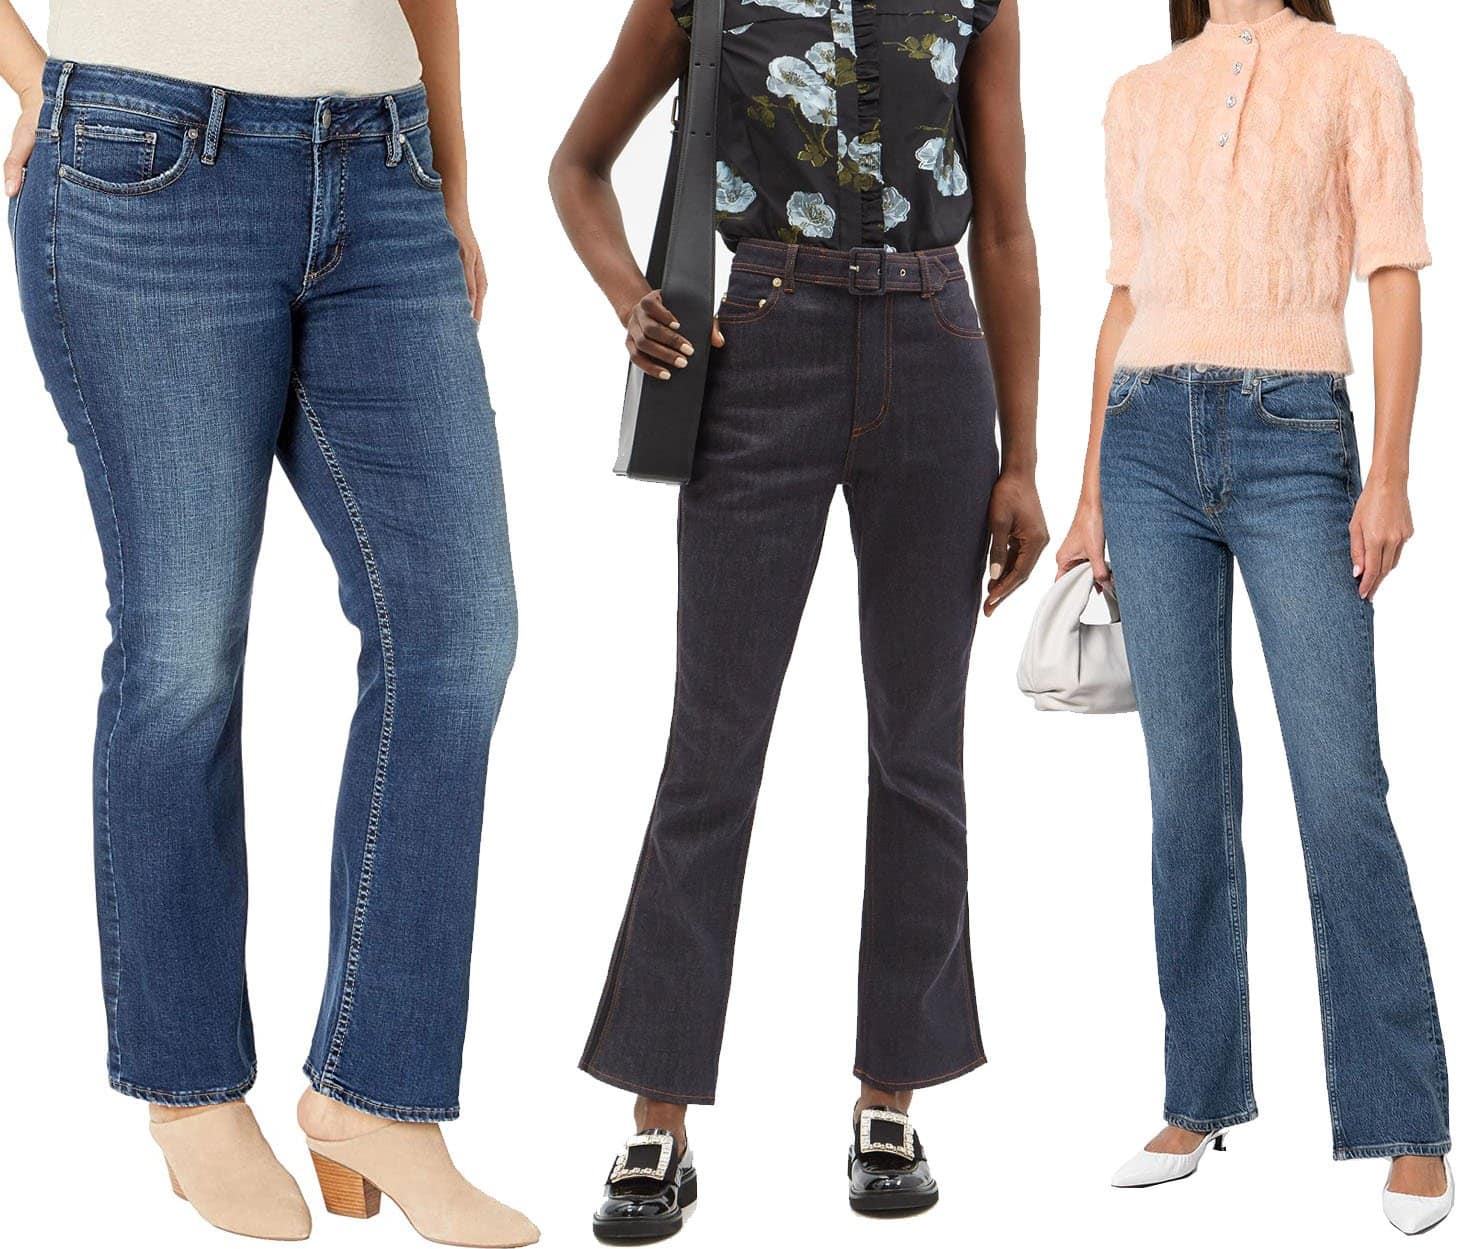 Diverse Denim: A selection showcasing Silver Jeans Co.'s Curvy Fit Slim Boot Jeans, Erdem's Vina Belted Straight-Leg Jeans, and Boyish Jeans' Flared-Leg style, catering to various curvy silhouettes